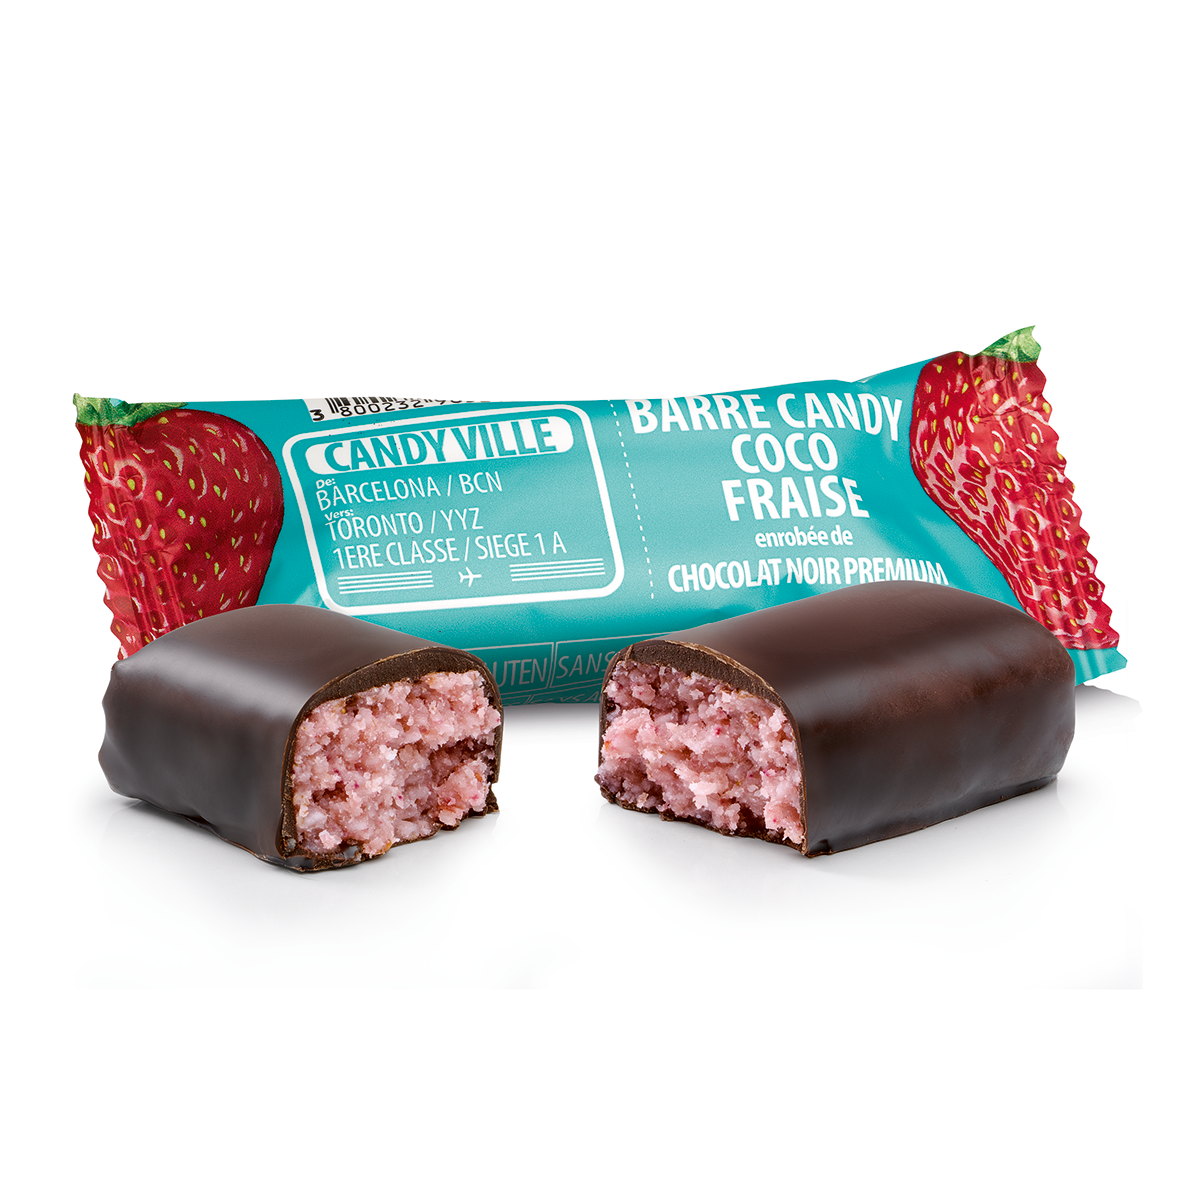 Barre Coco-Fraise 50g